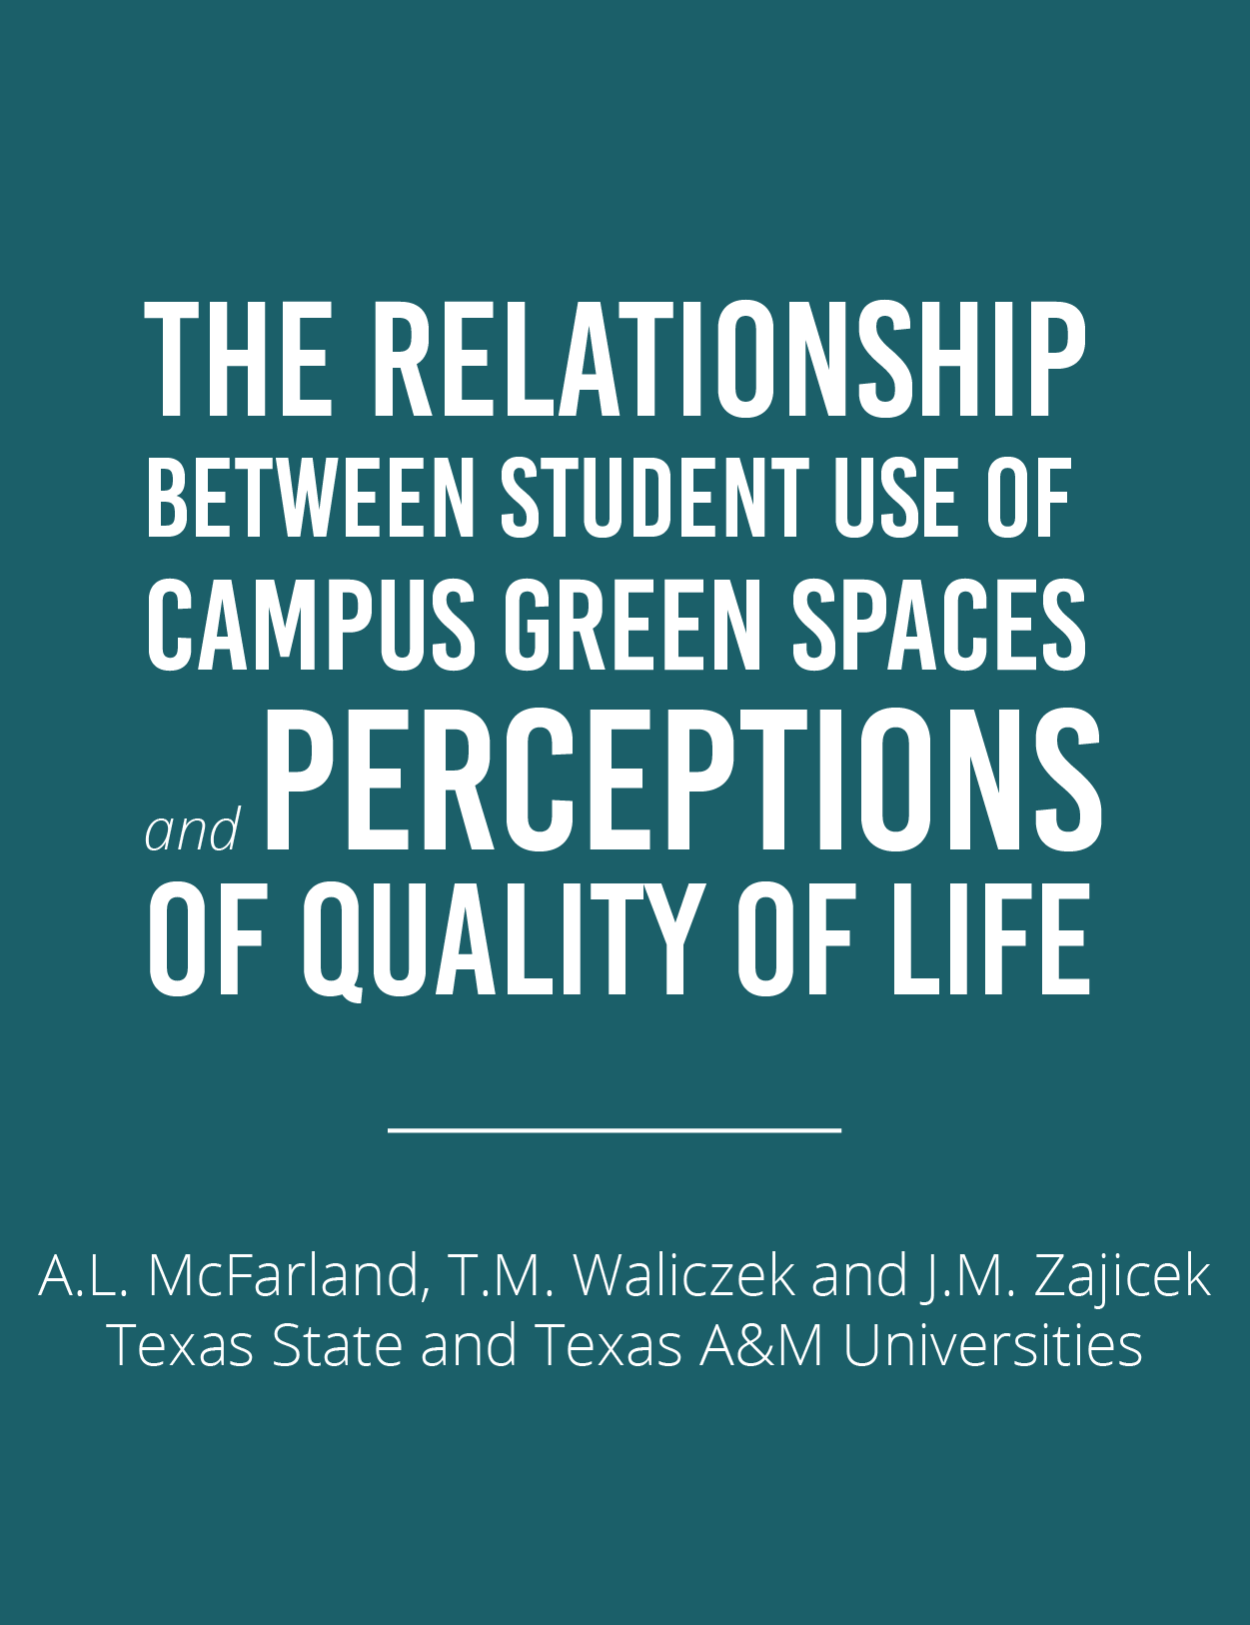 Campus Green Spaces & Quality of LifeFeatured Image